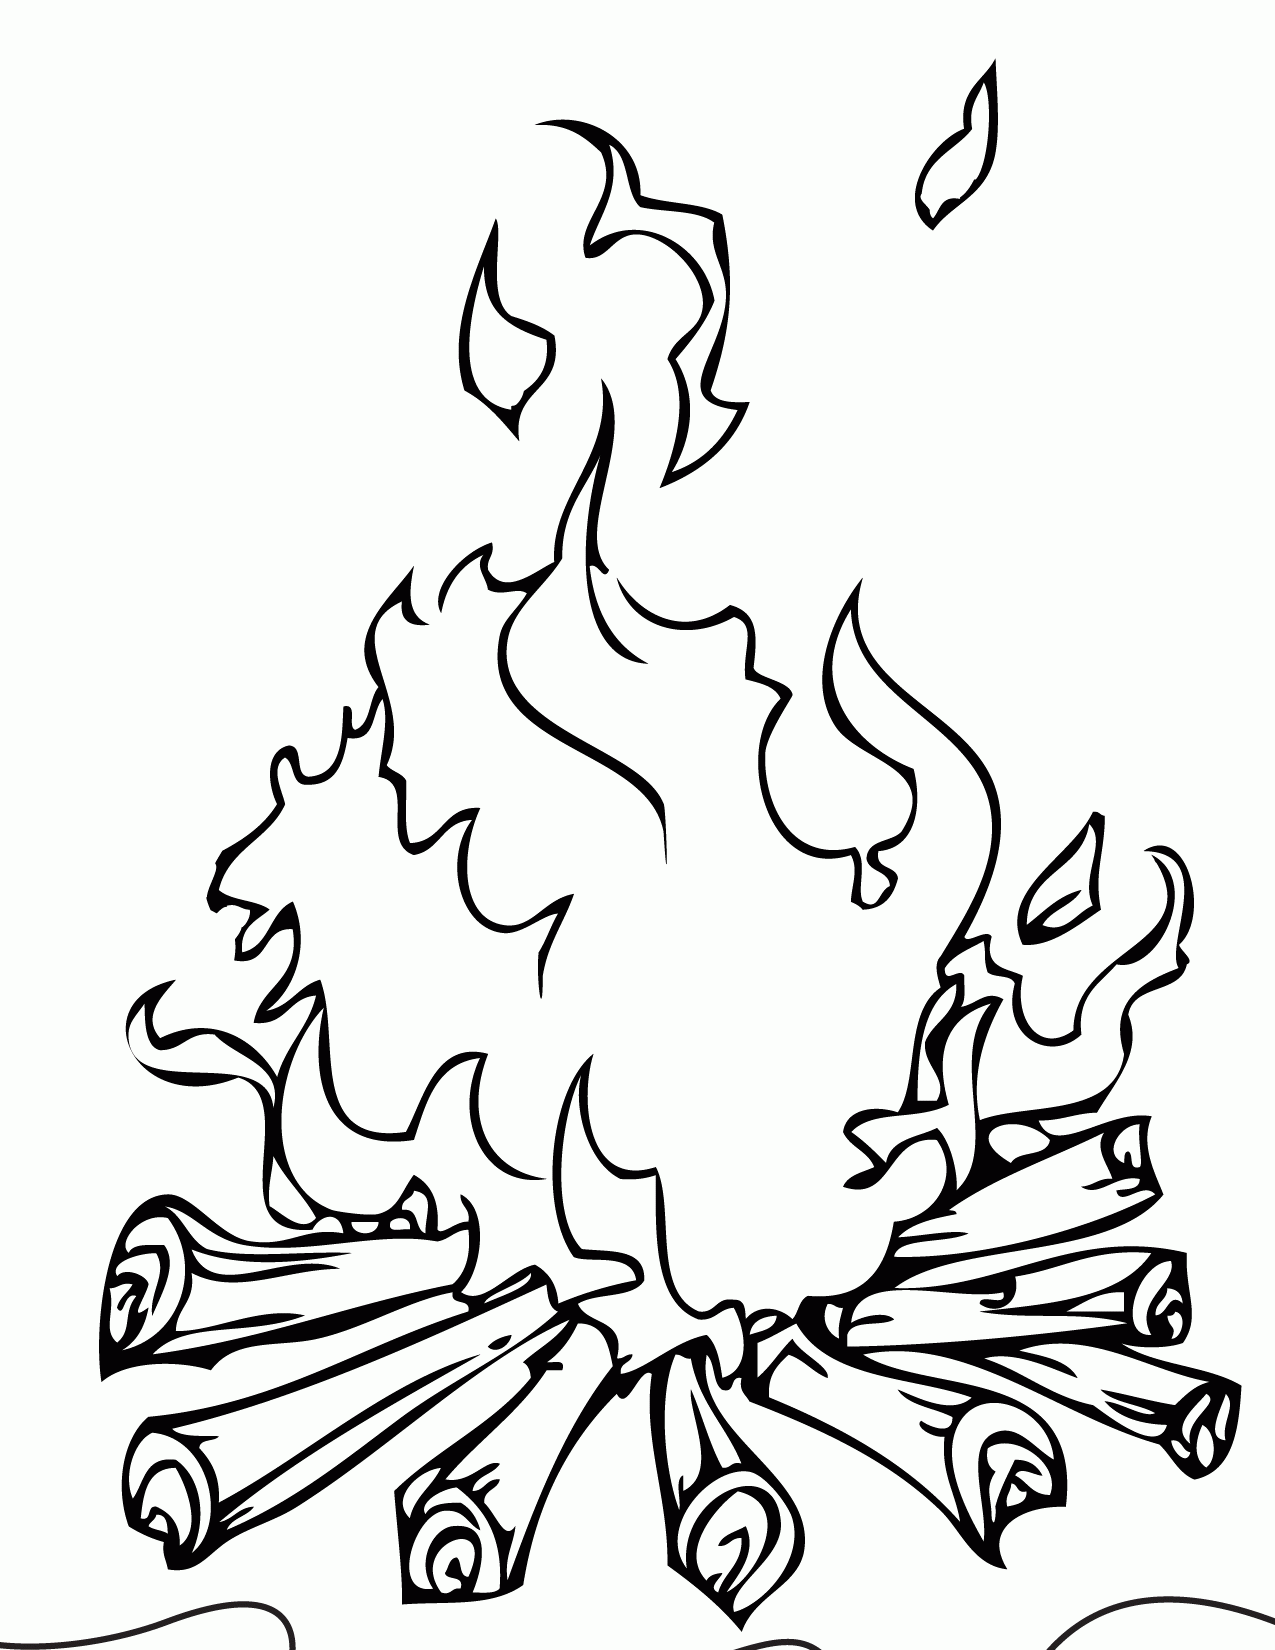 Campfire Coloring Page - Handipoints